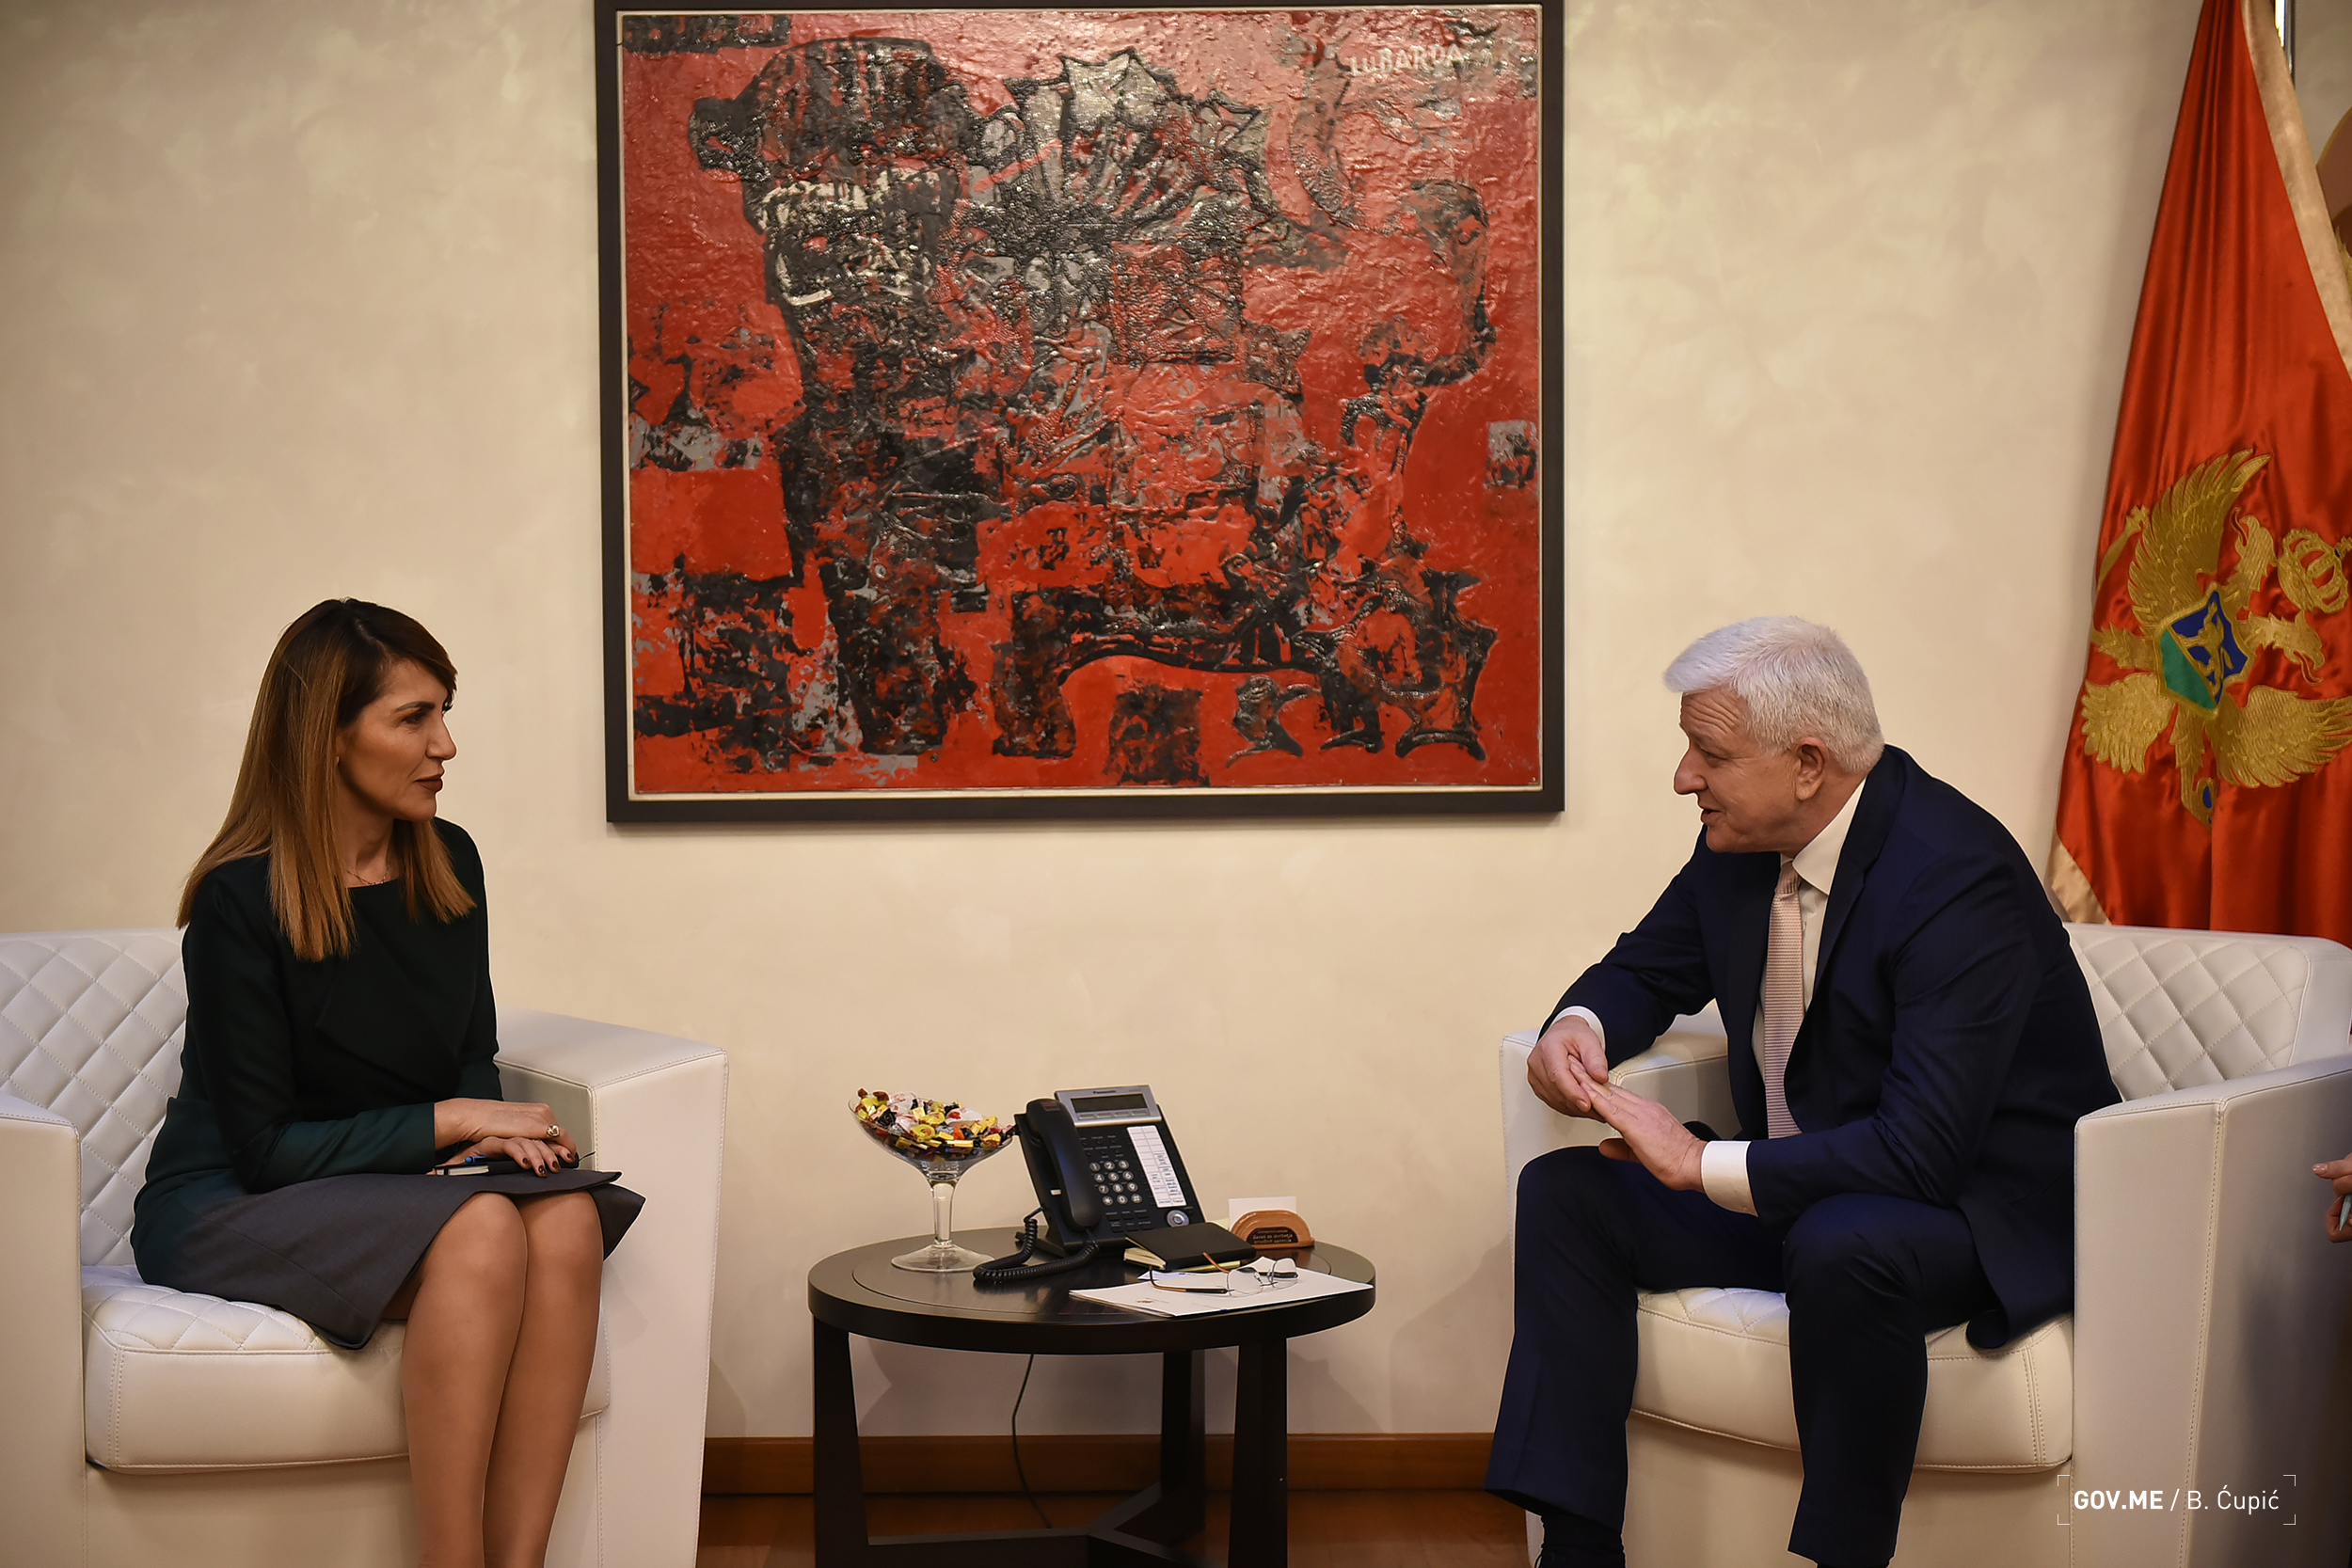 Secretary General of the Regional Cooperation Council (RCC), Majlinda Bregu with the Prime Minister of Montenegro, Duško Marković, in Podgorica on 22 February 2019 (Photo: Courtesy of the Government of Montenegro)